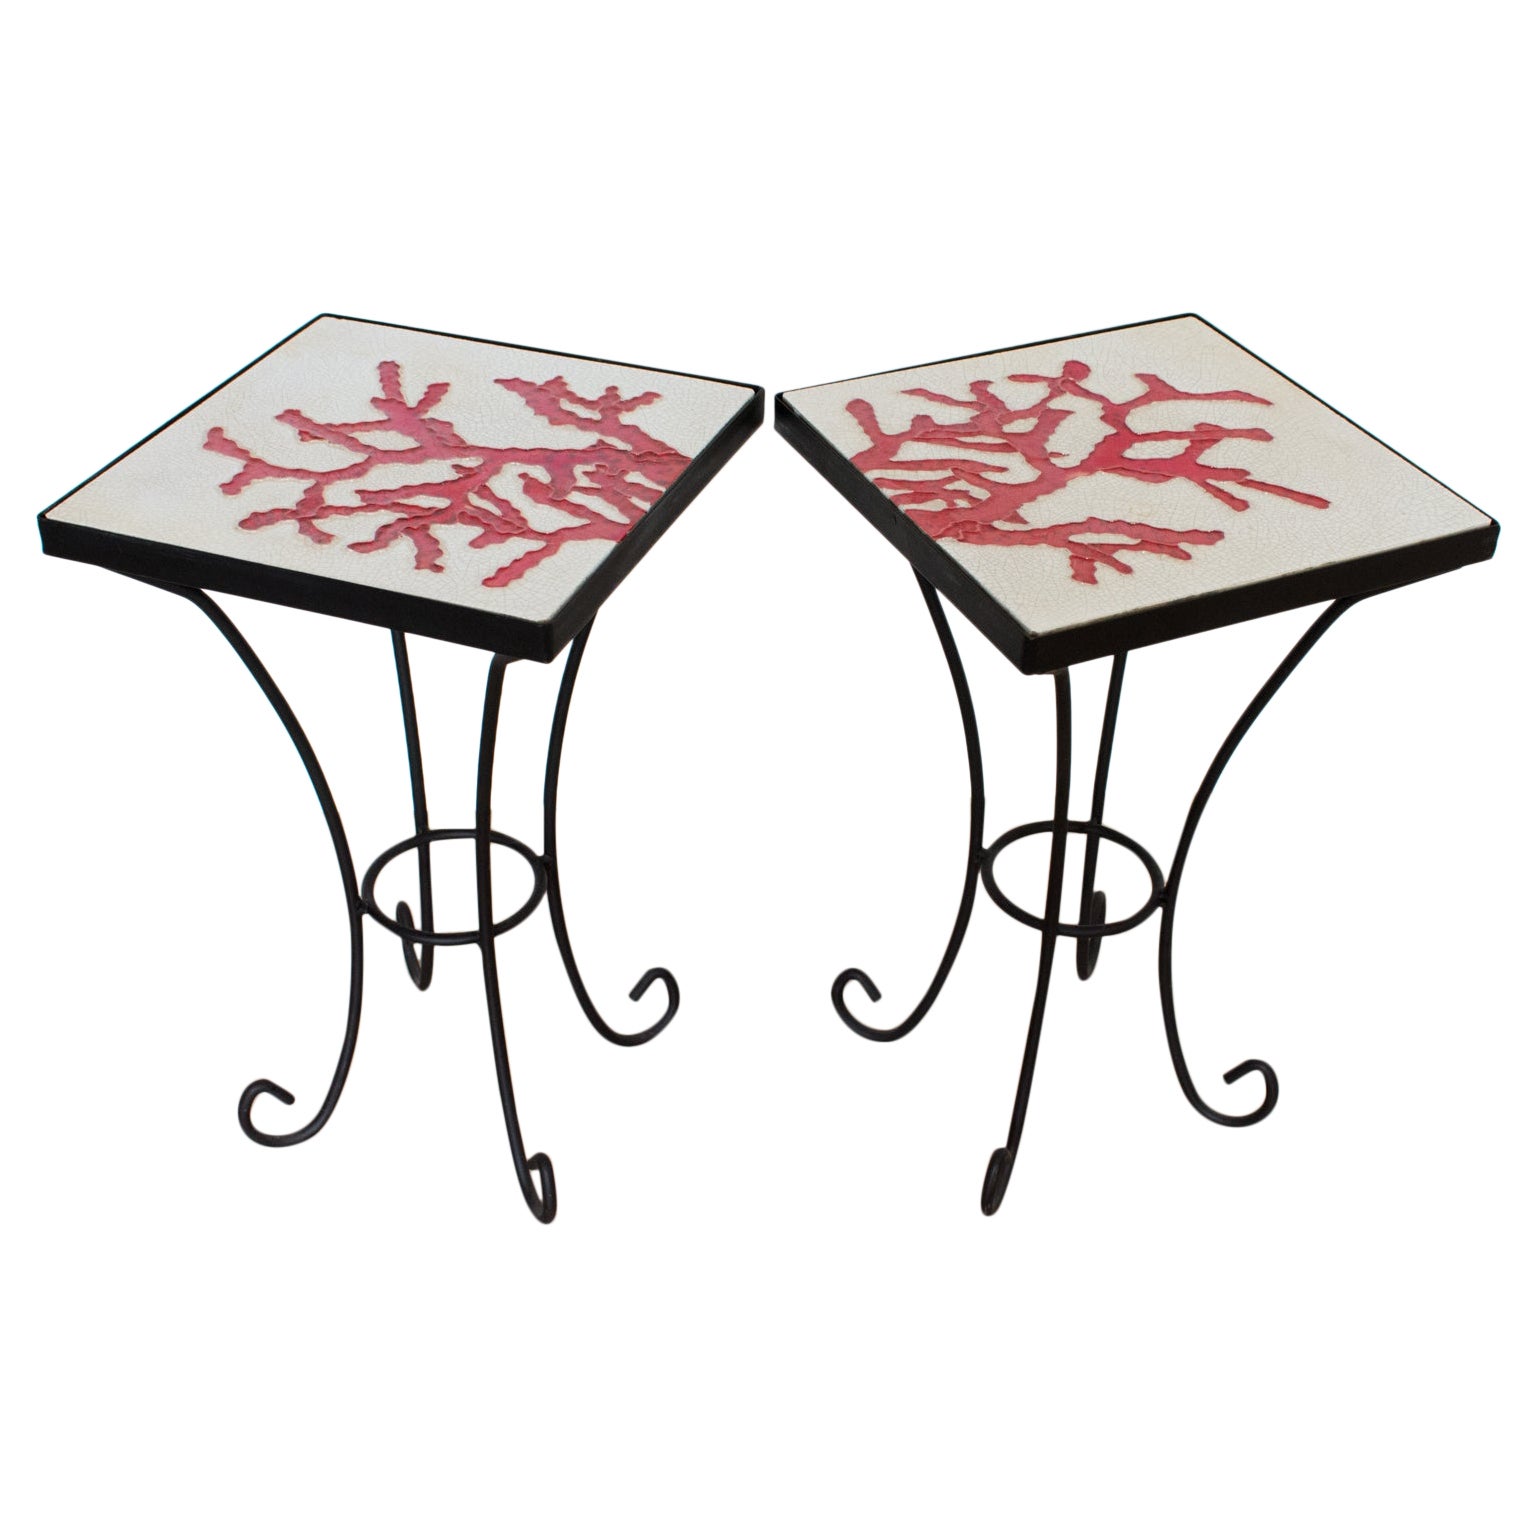 Wrought Iron and Ceramic Tile Side Coffee Table, a pair, 1950s For Sale